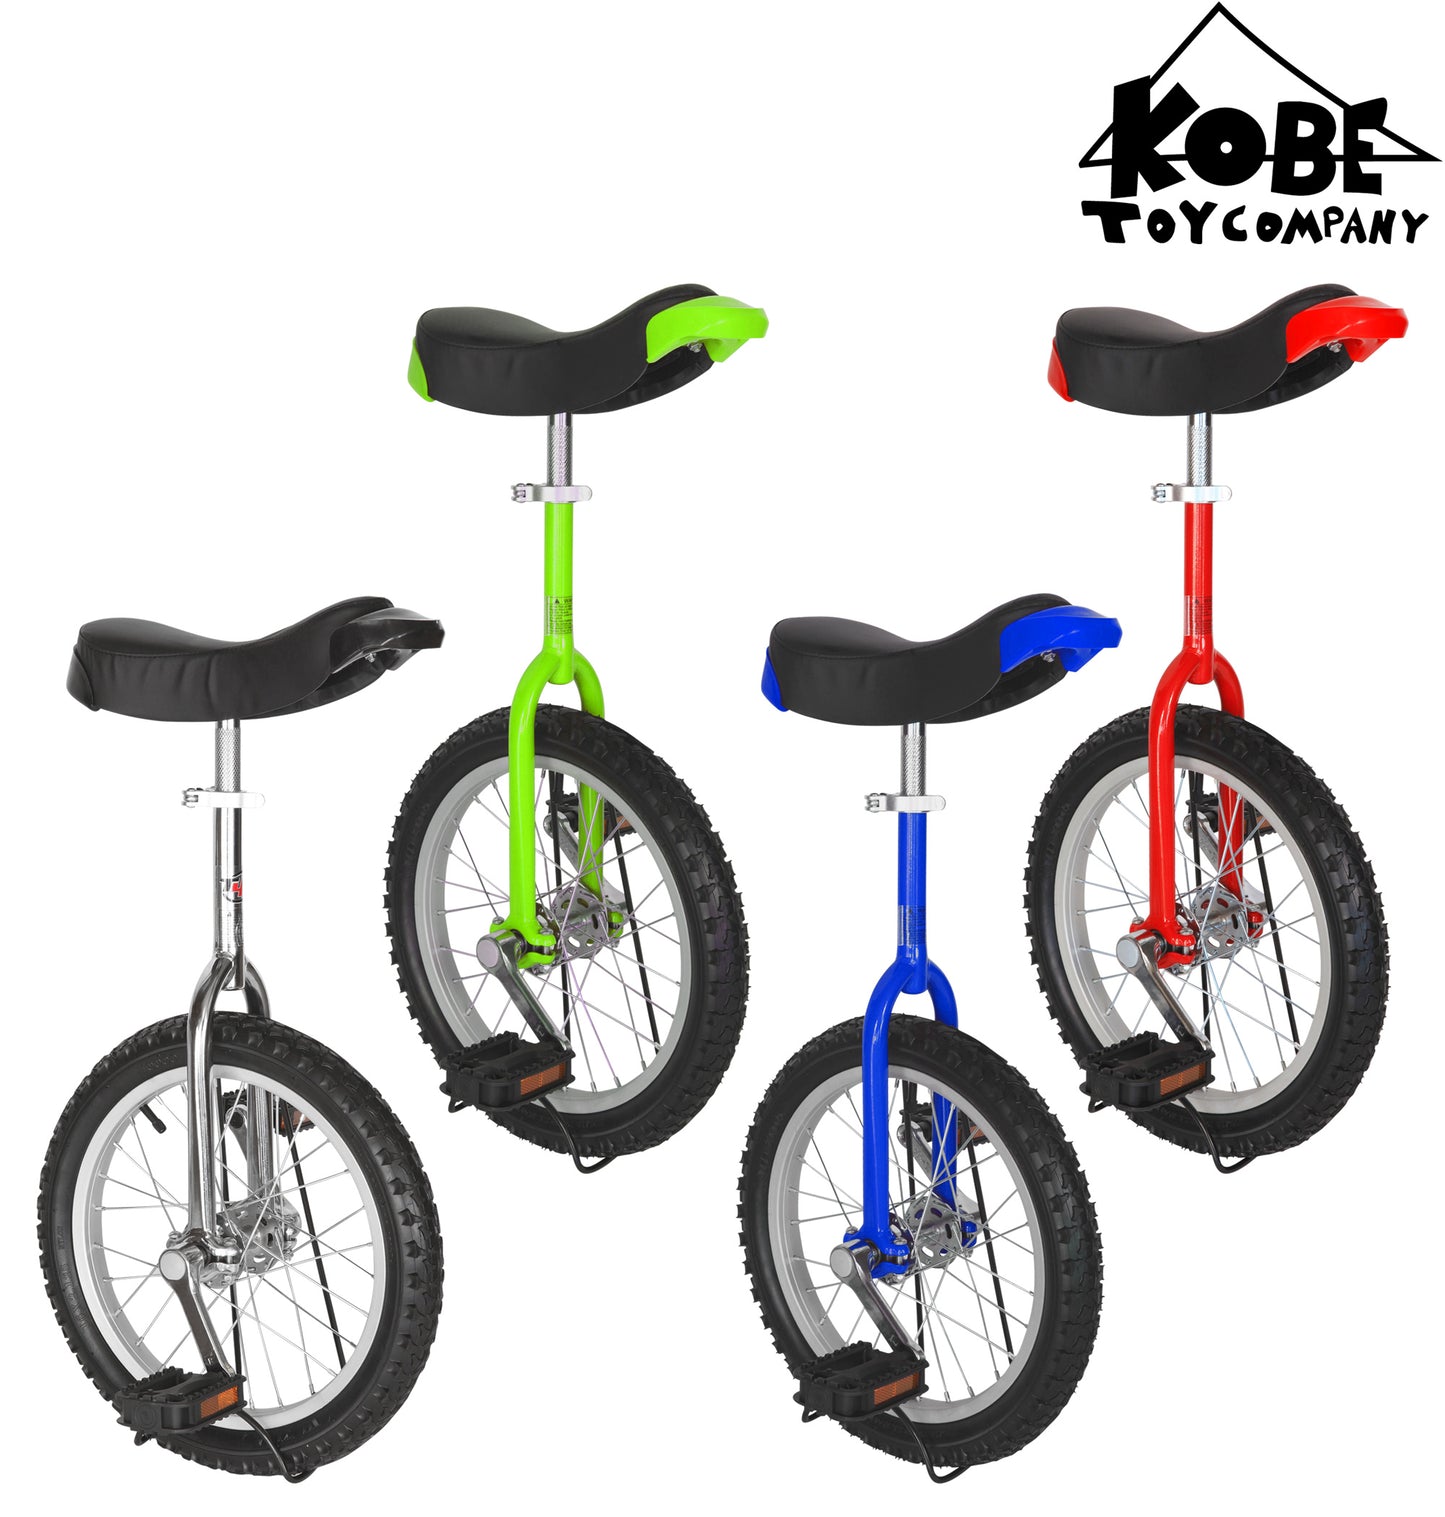 Freestyle Unicycle 16" Wheel 4 Colors Choices